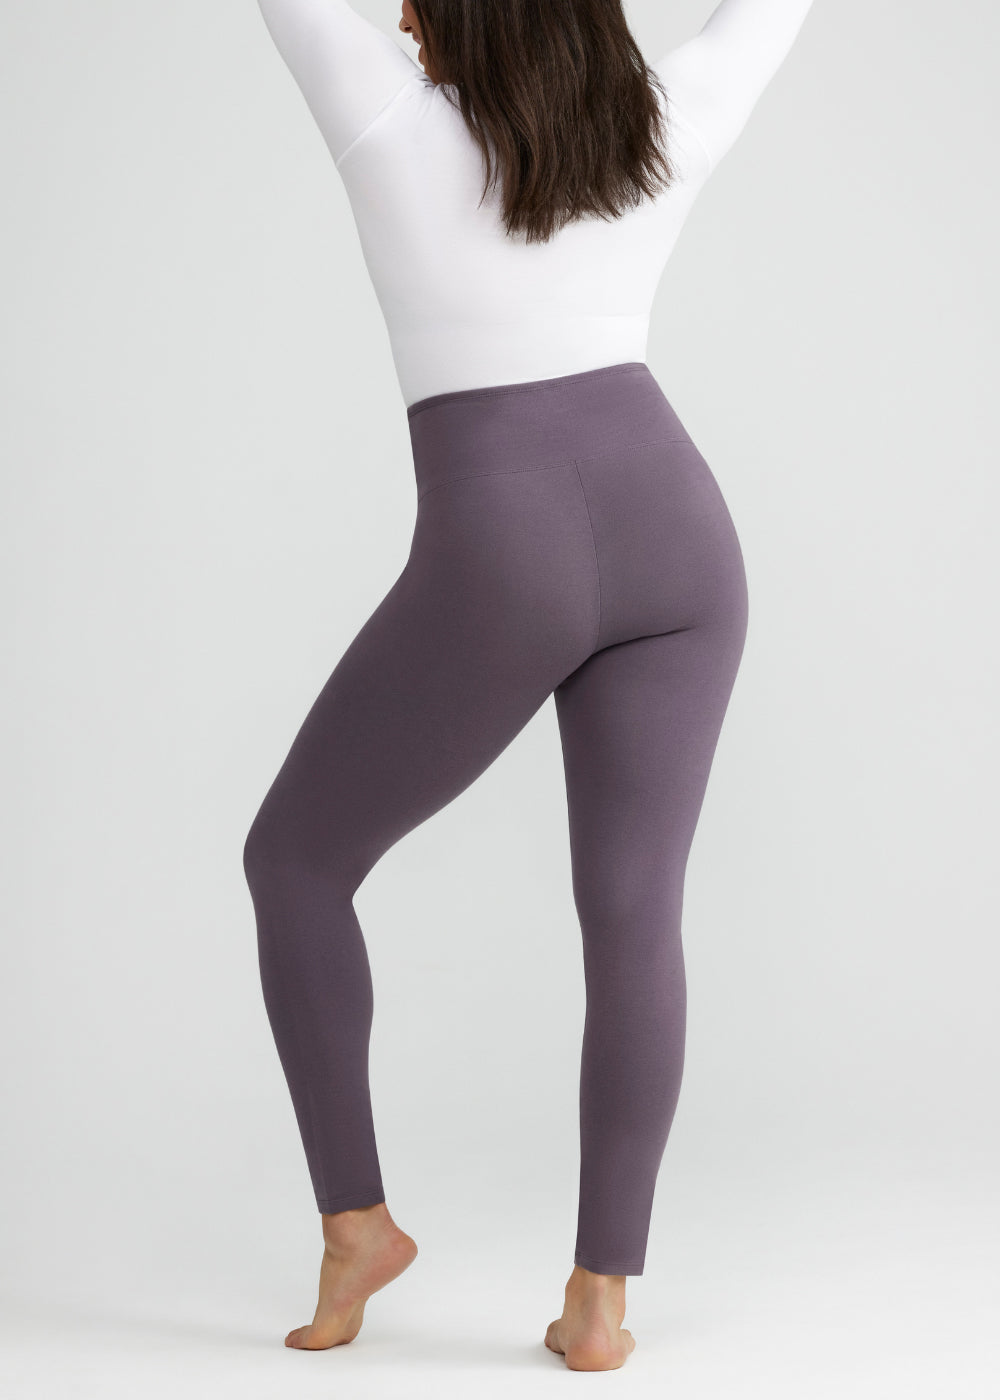 Leggings with a purpose — Recovery Wear Leggings Review, by Rachel Lang